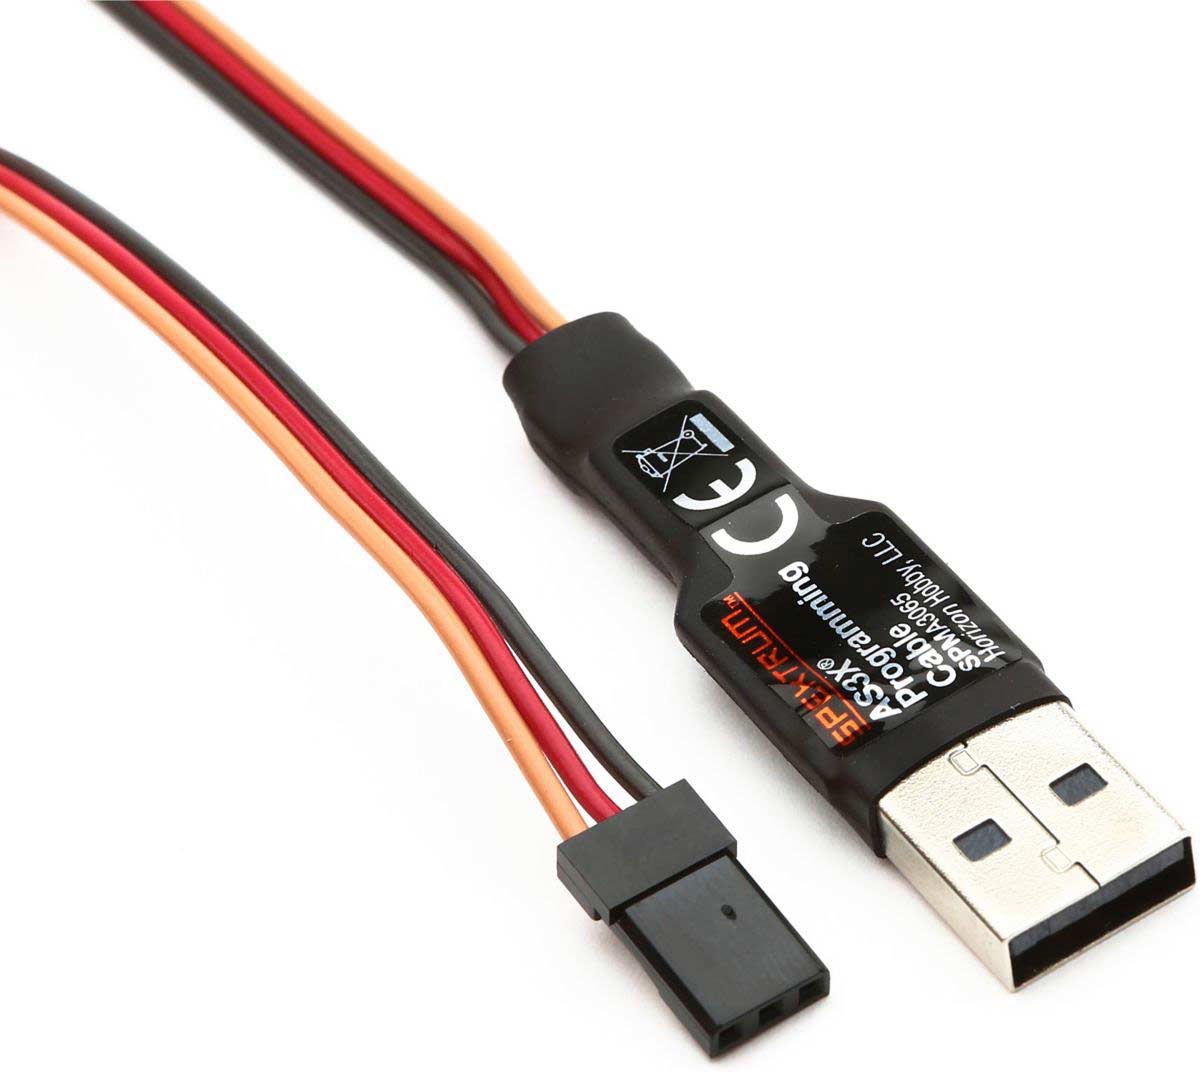 Transmitter/Receiver Programming Cable: USB Interface